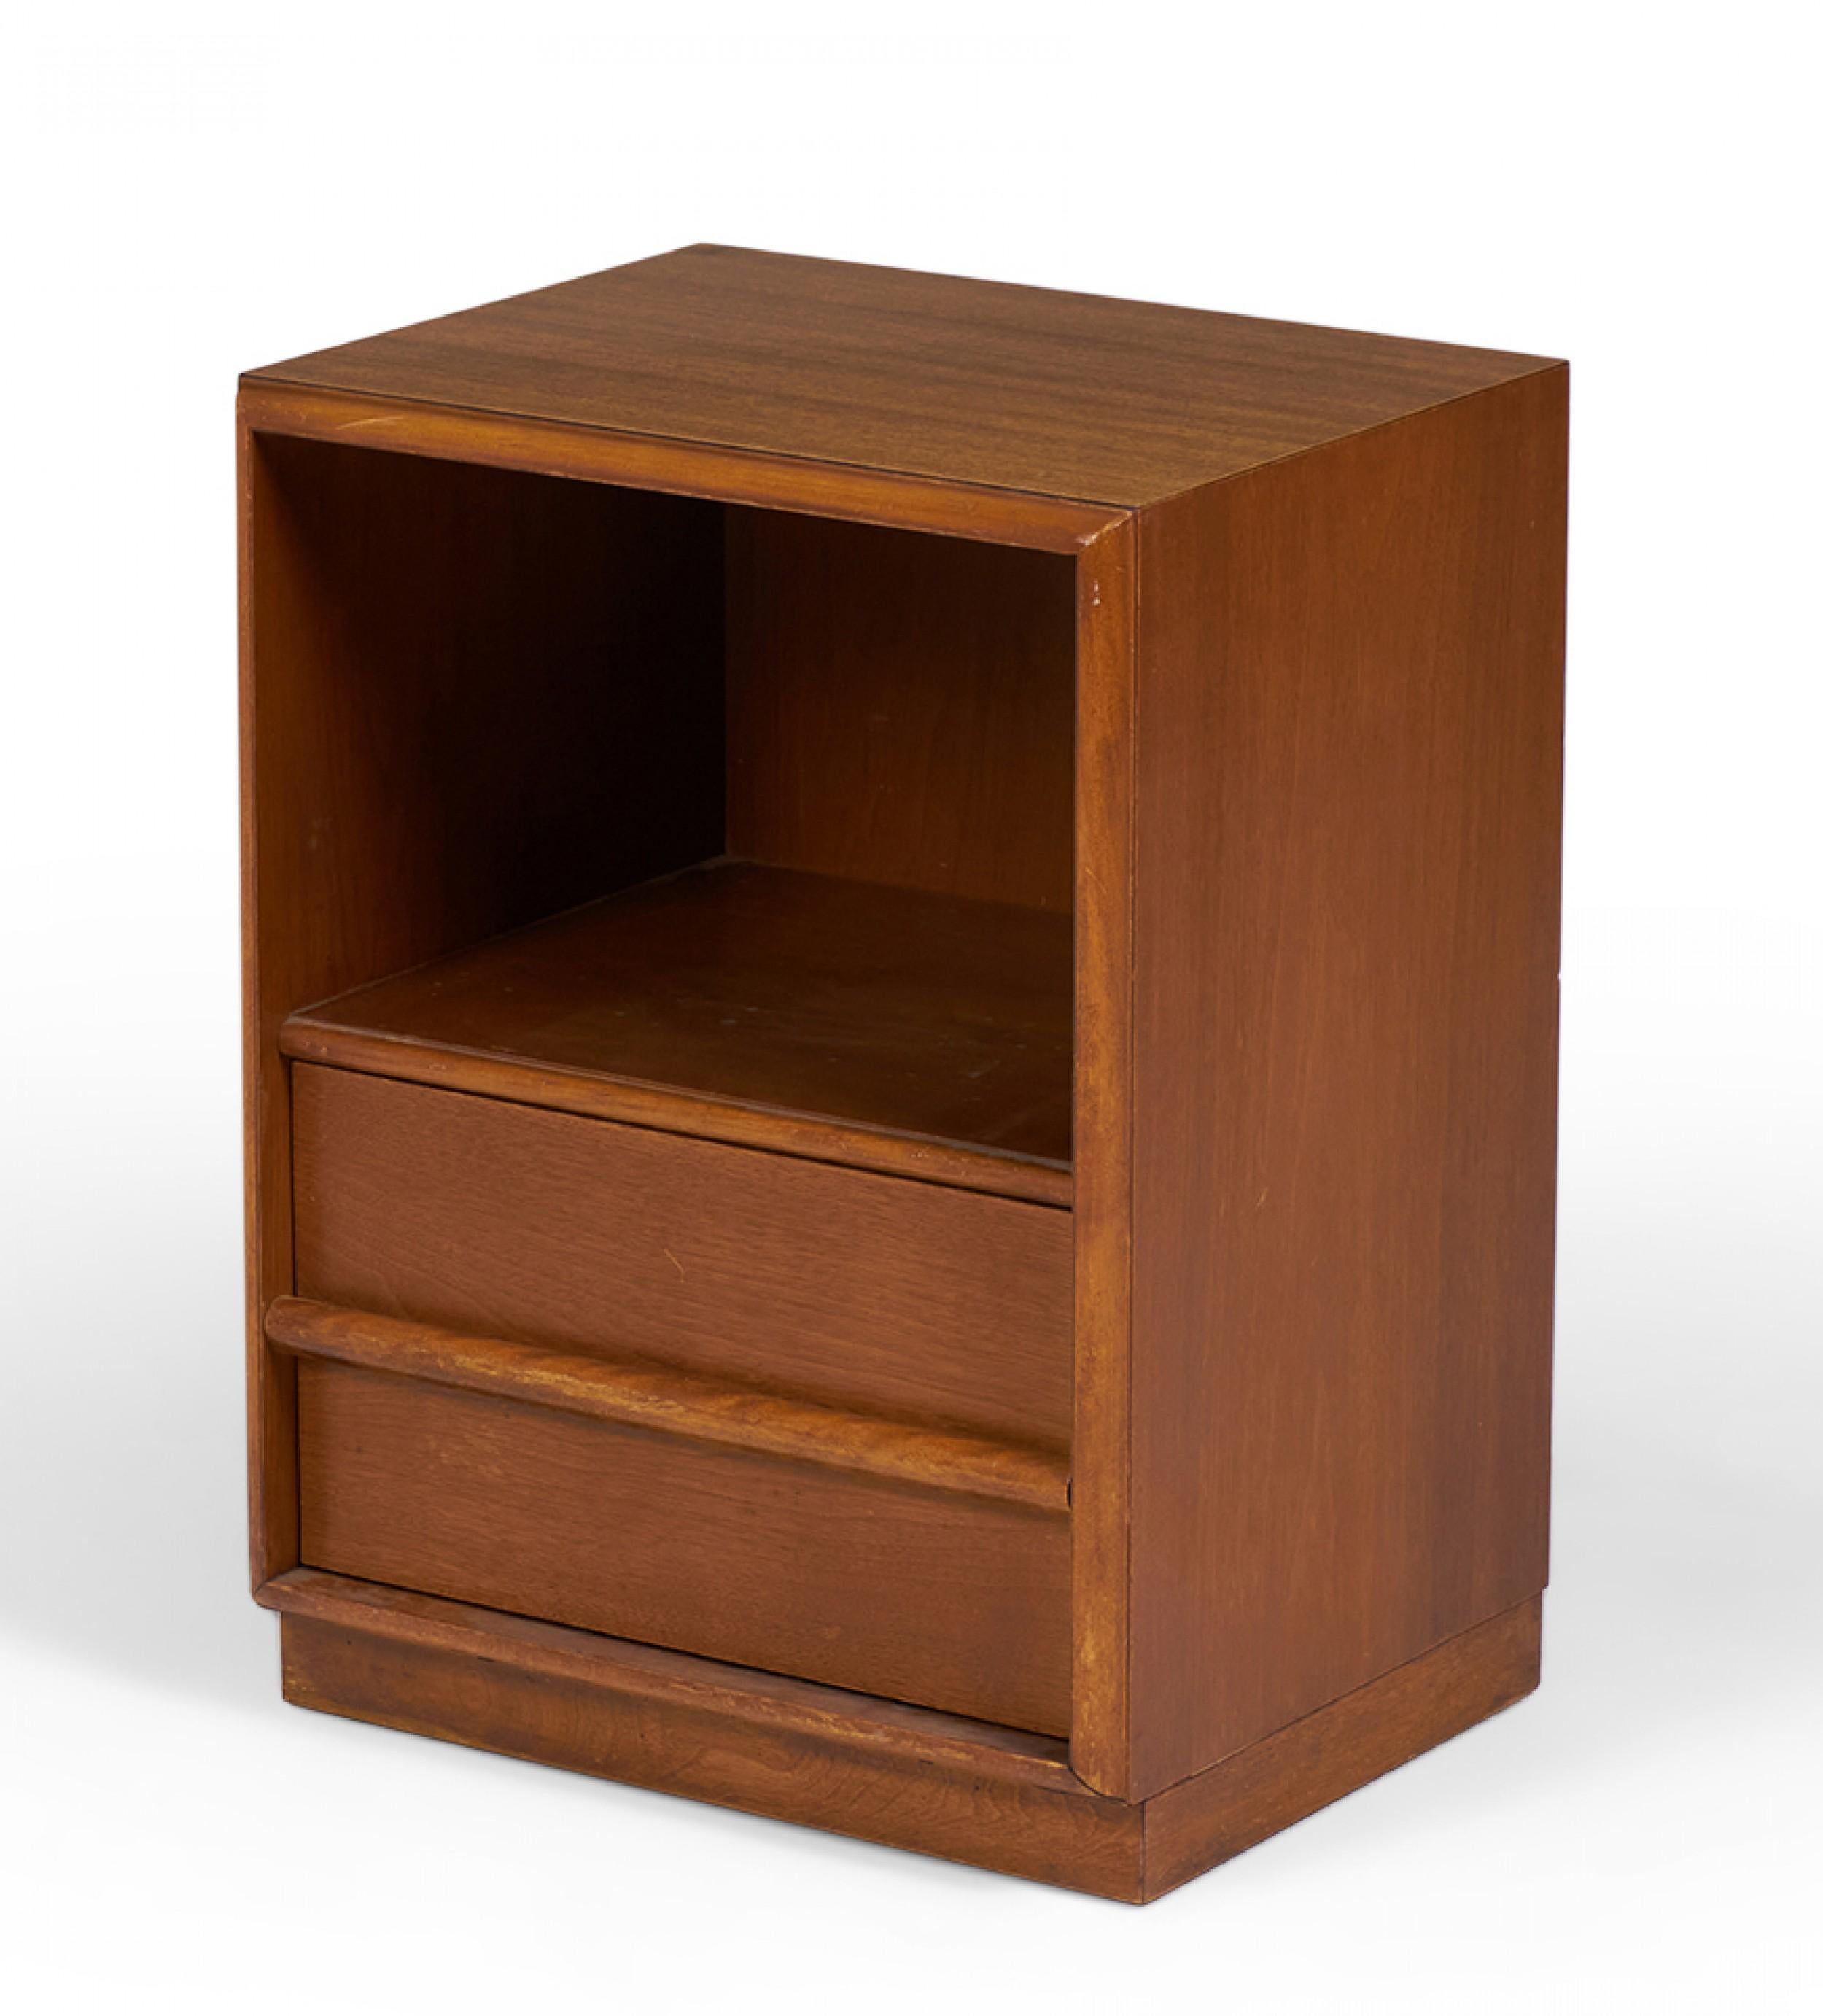 American Mid-Century walnut nightstand with an open upper cabinet shelf and a single lower drawer with a horizontal raised wooden drawer pull. (T.H. ROBSJOHN-GIBBINGS FOR WIDDICOMB)(Same piece with different finish: DUF0143A&B).